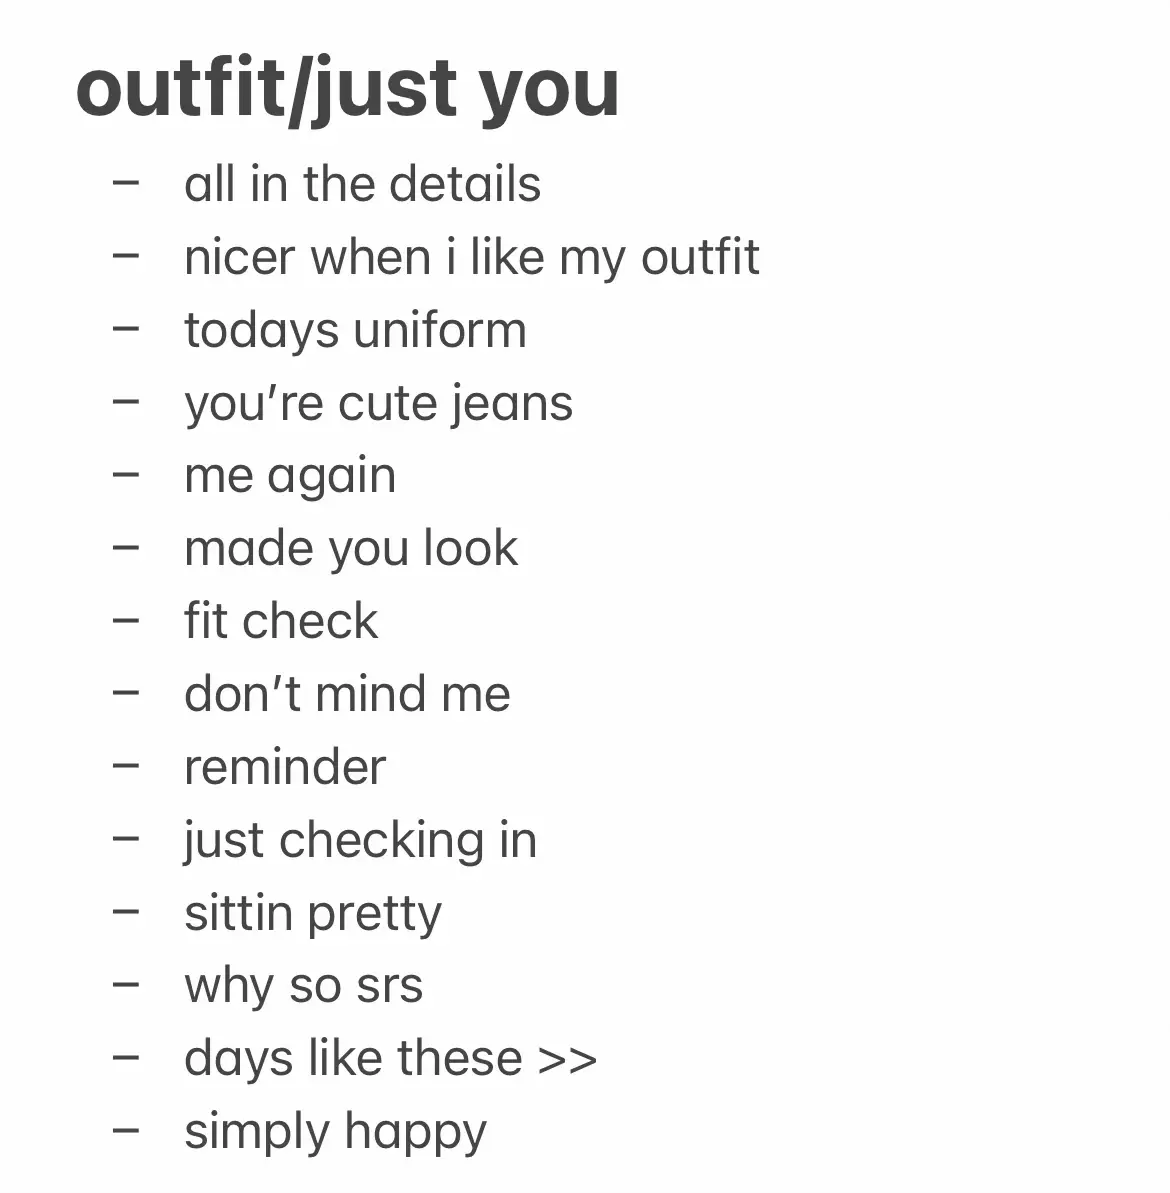  A list of things to do when you like your outfit